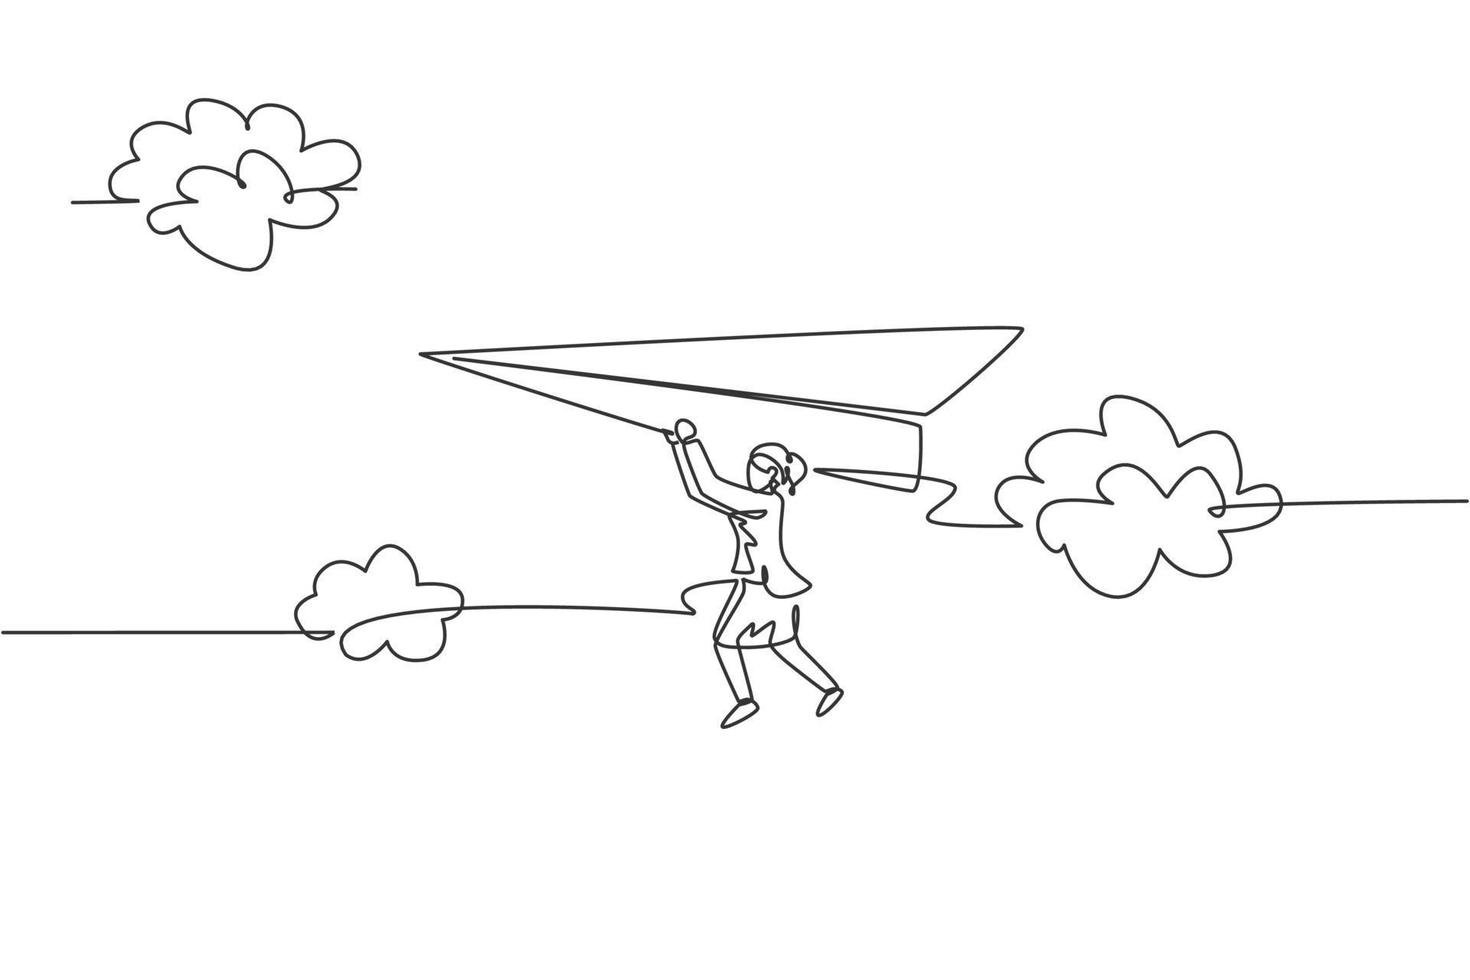 Single one line drawing young businesswoman hanging on flying paper plane at the sky. Business goal challenge. Metaphor minimal concept. Modern continuous line draw design graphic vector illustration